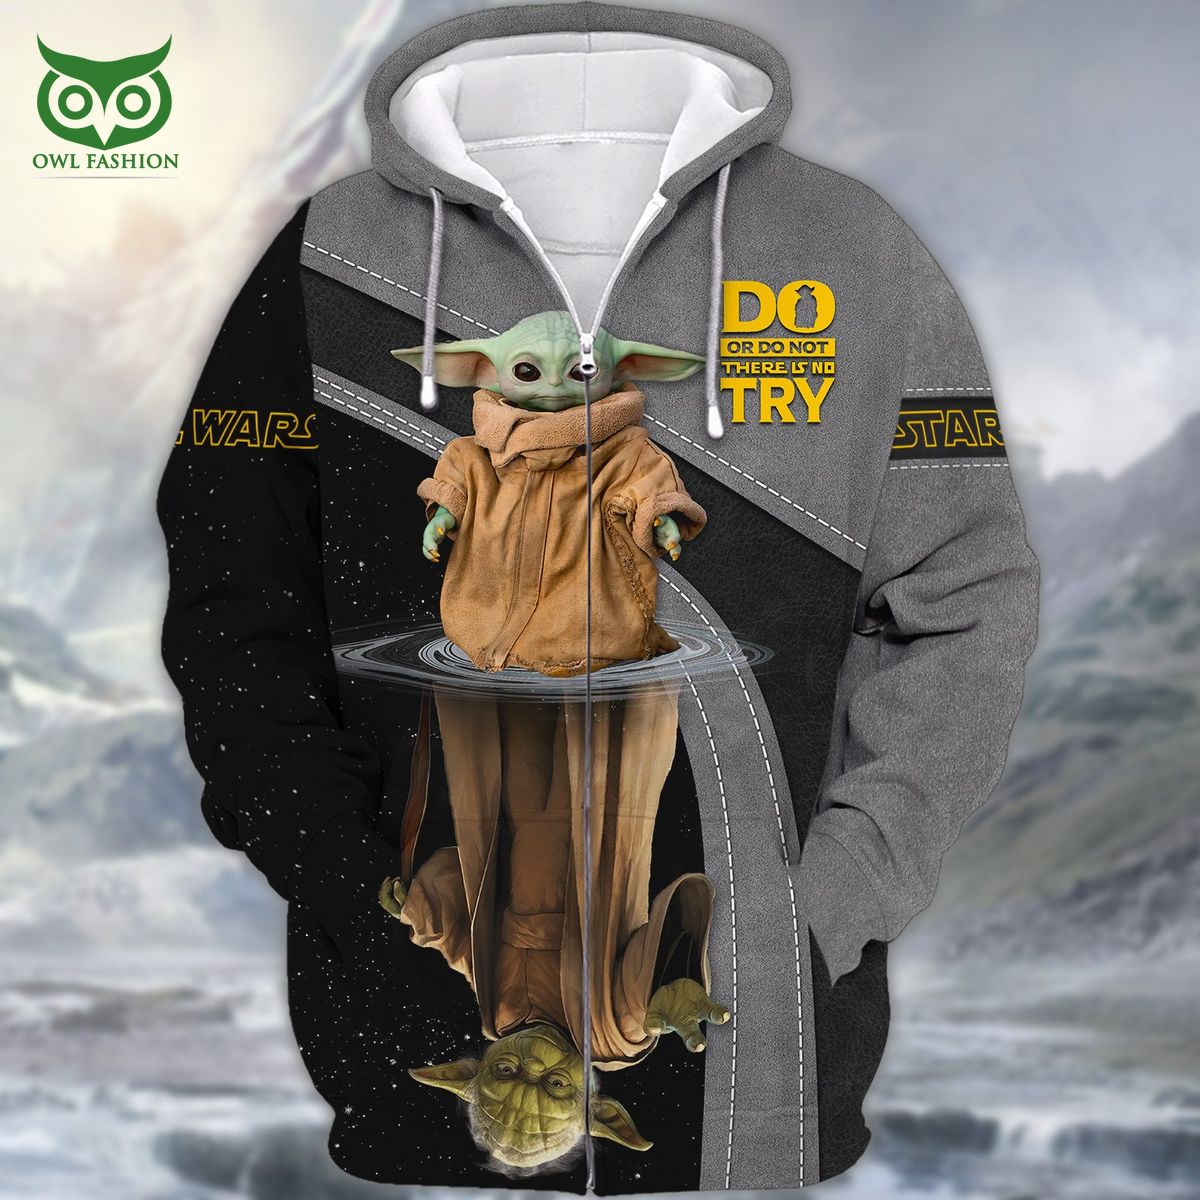 star wars baby yoda do or not do 3d hoodie tshirt polo 1 ehphm